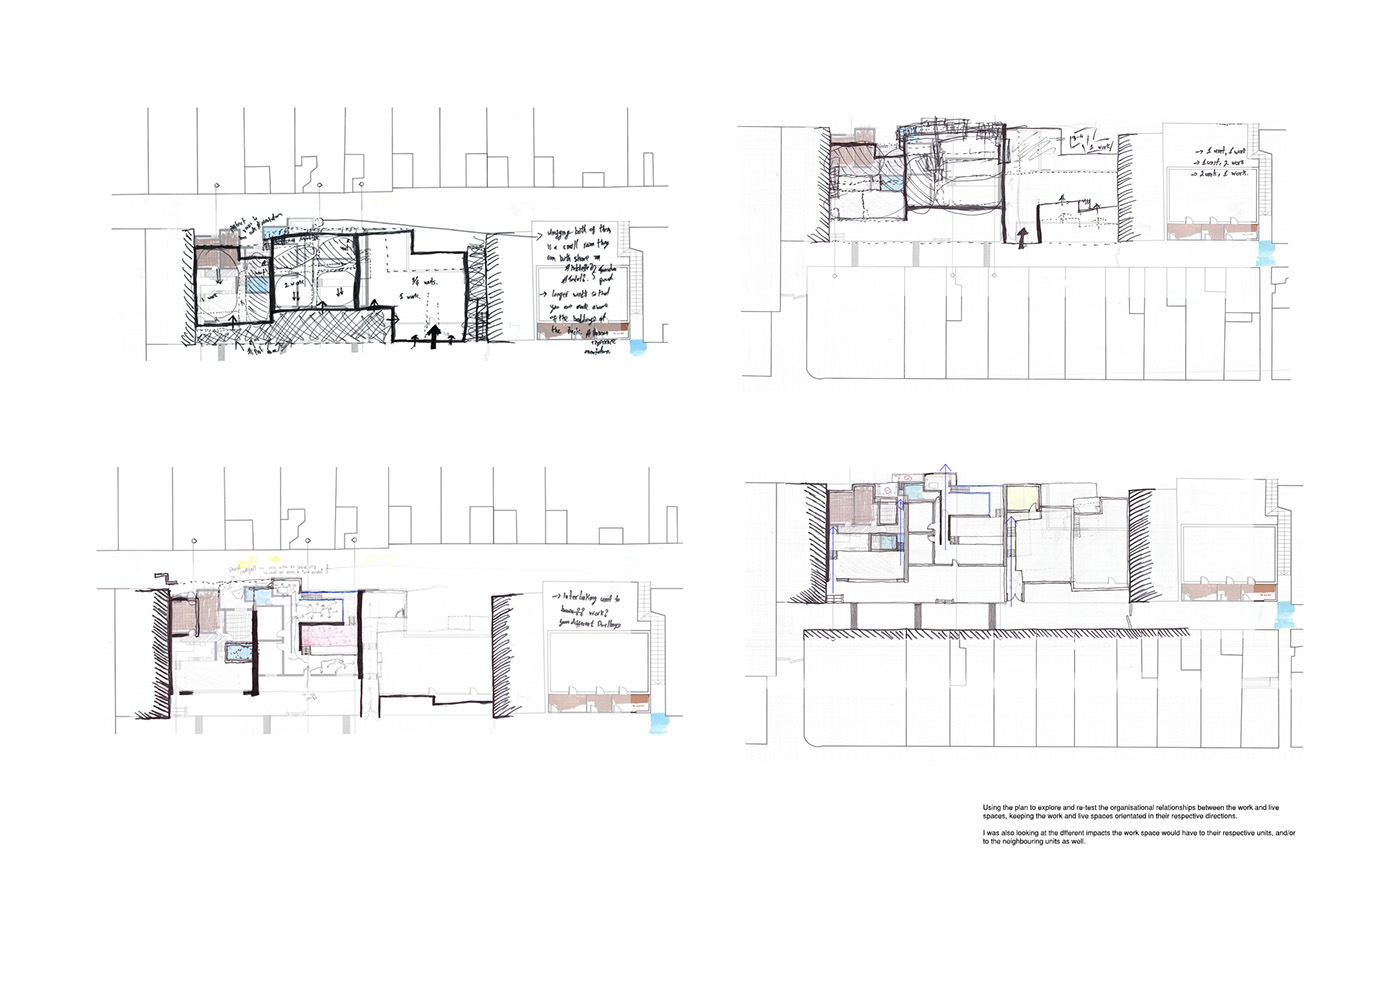 live Work  dwellings housing arhchitecture hastings brighton architecture